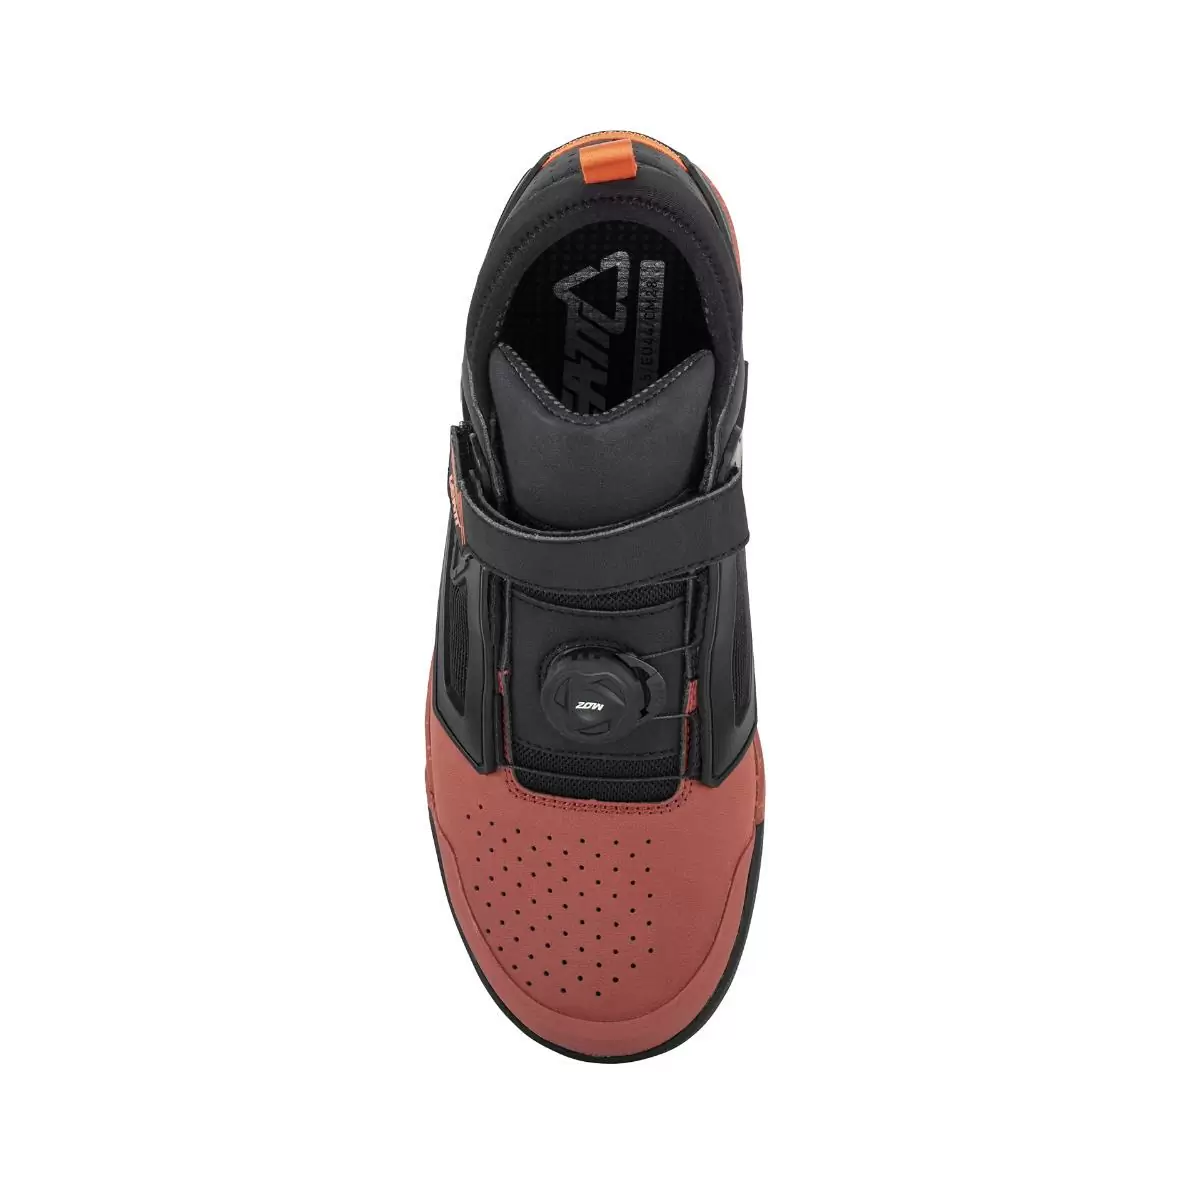 Chaussures VTT 3.0 Flat Pro Rouge Taille 44.5 #4